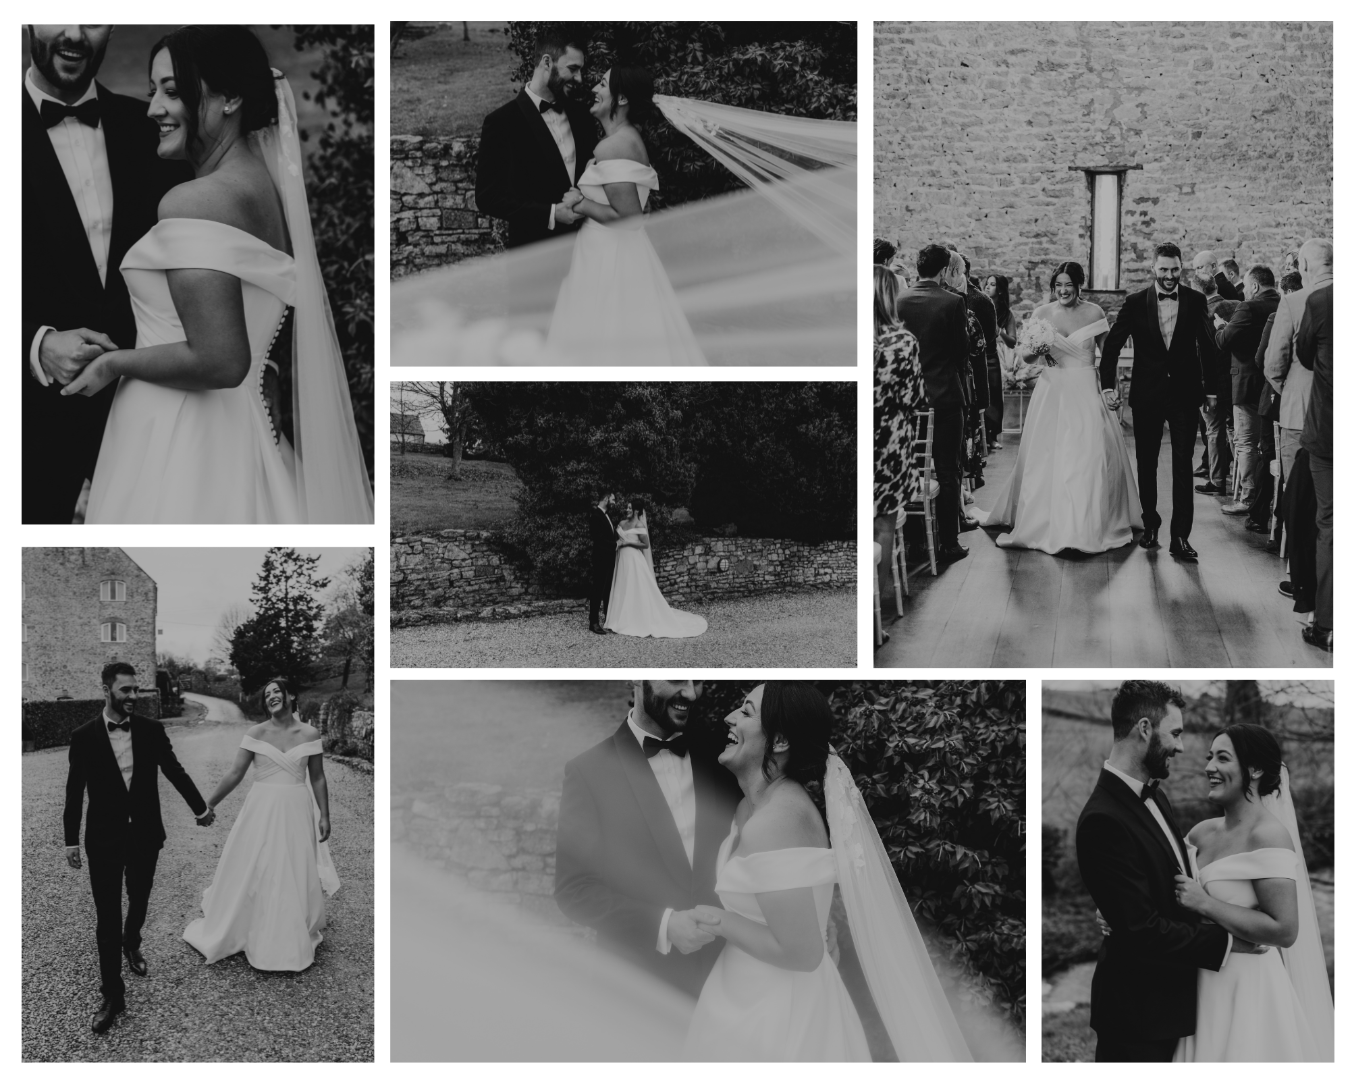 A collage of black and white photos of a bride and groom holding hands.